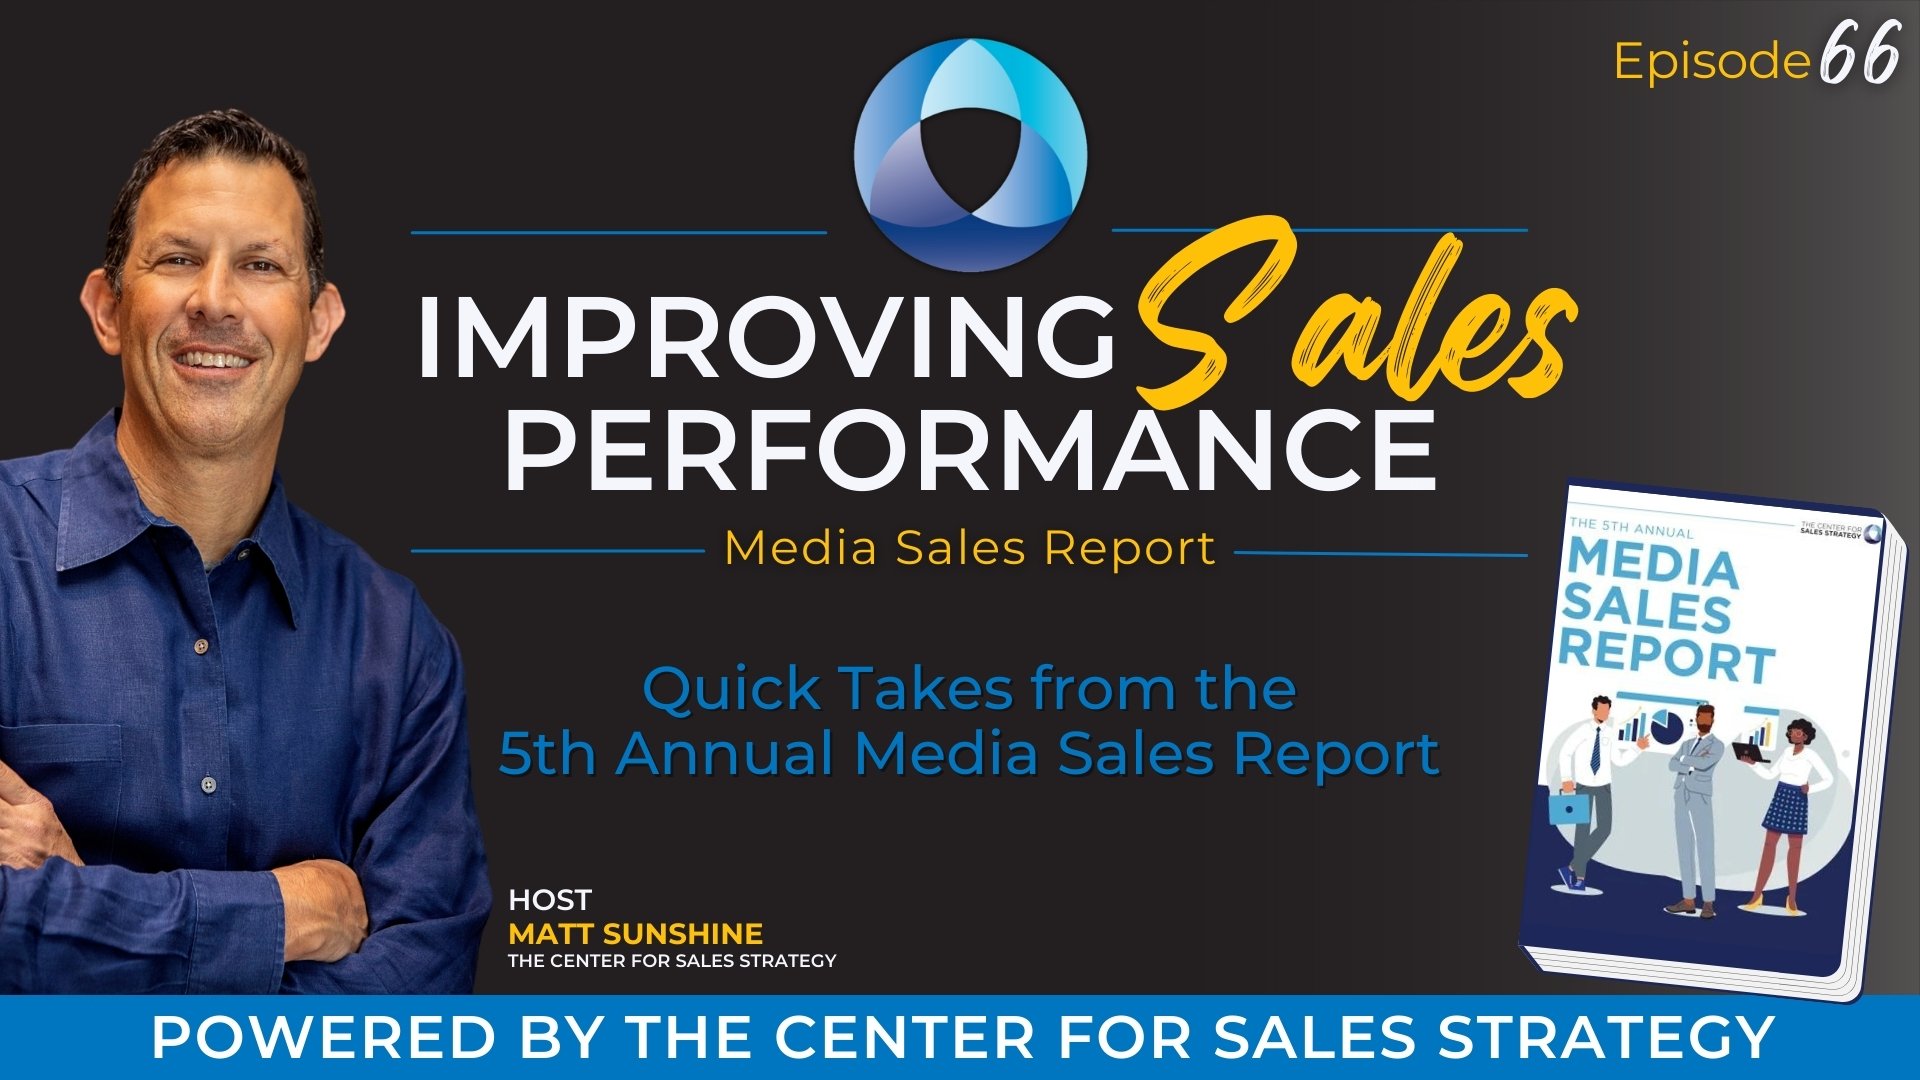 Quick Take: Highlights From The 5th Annual Media Sales Report